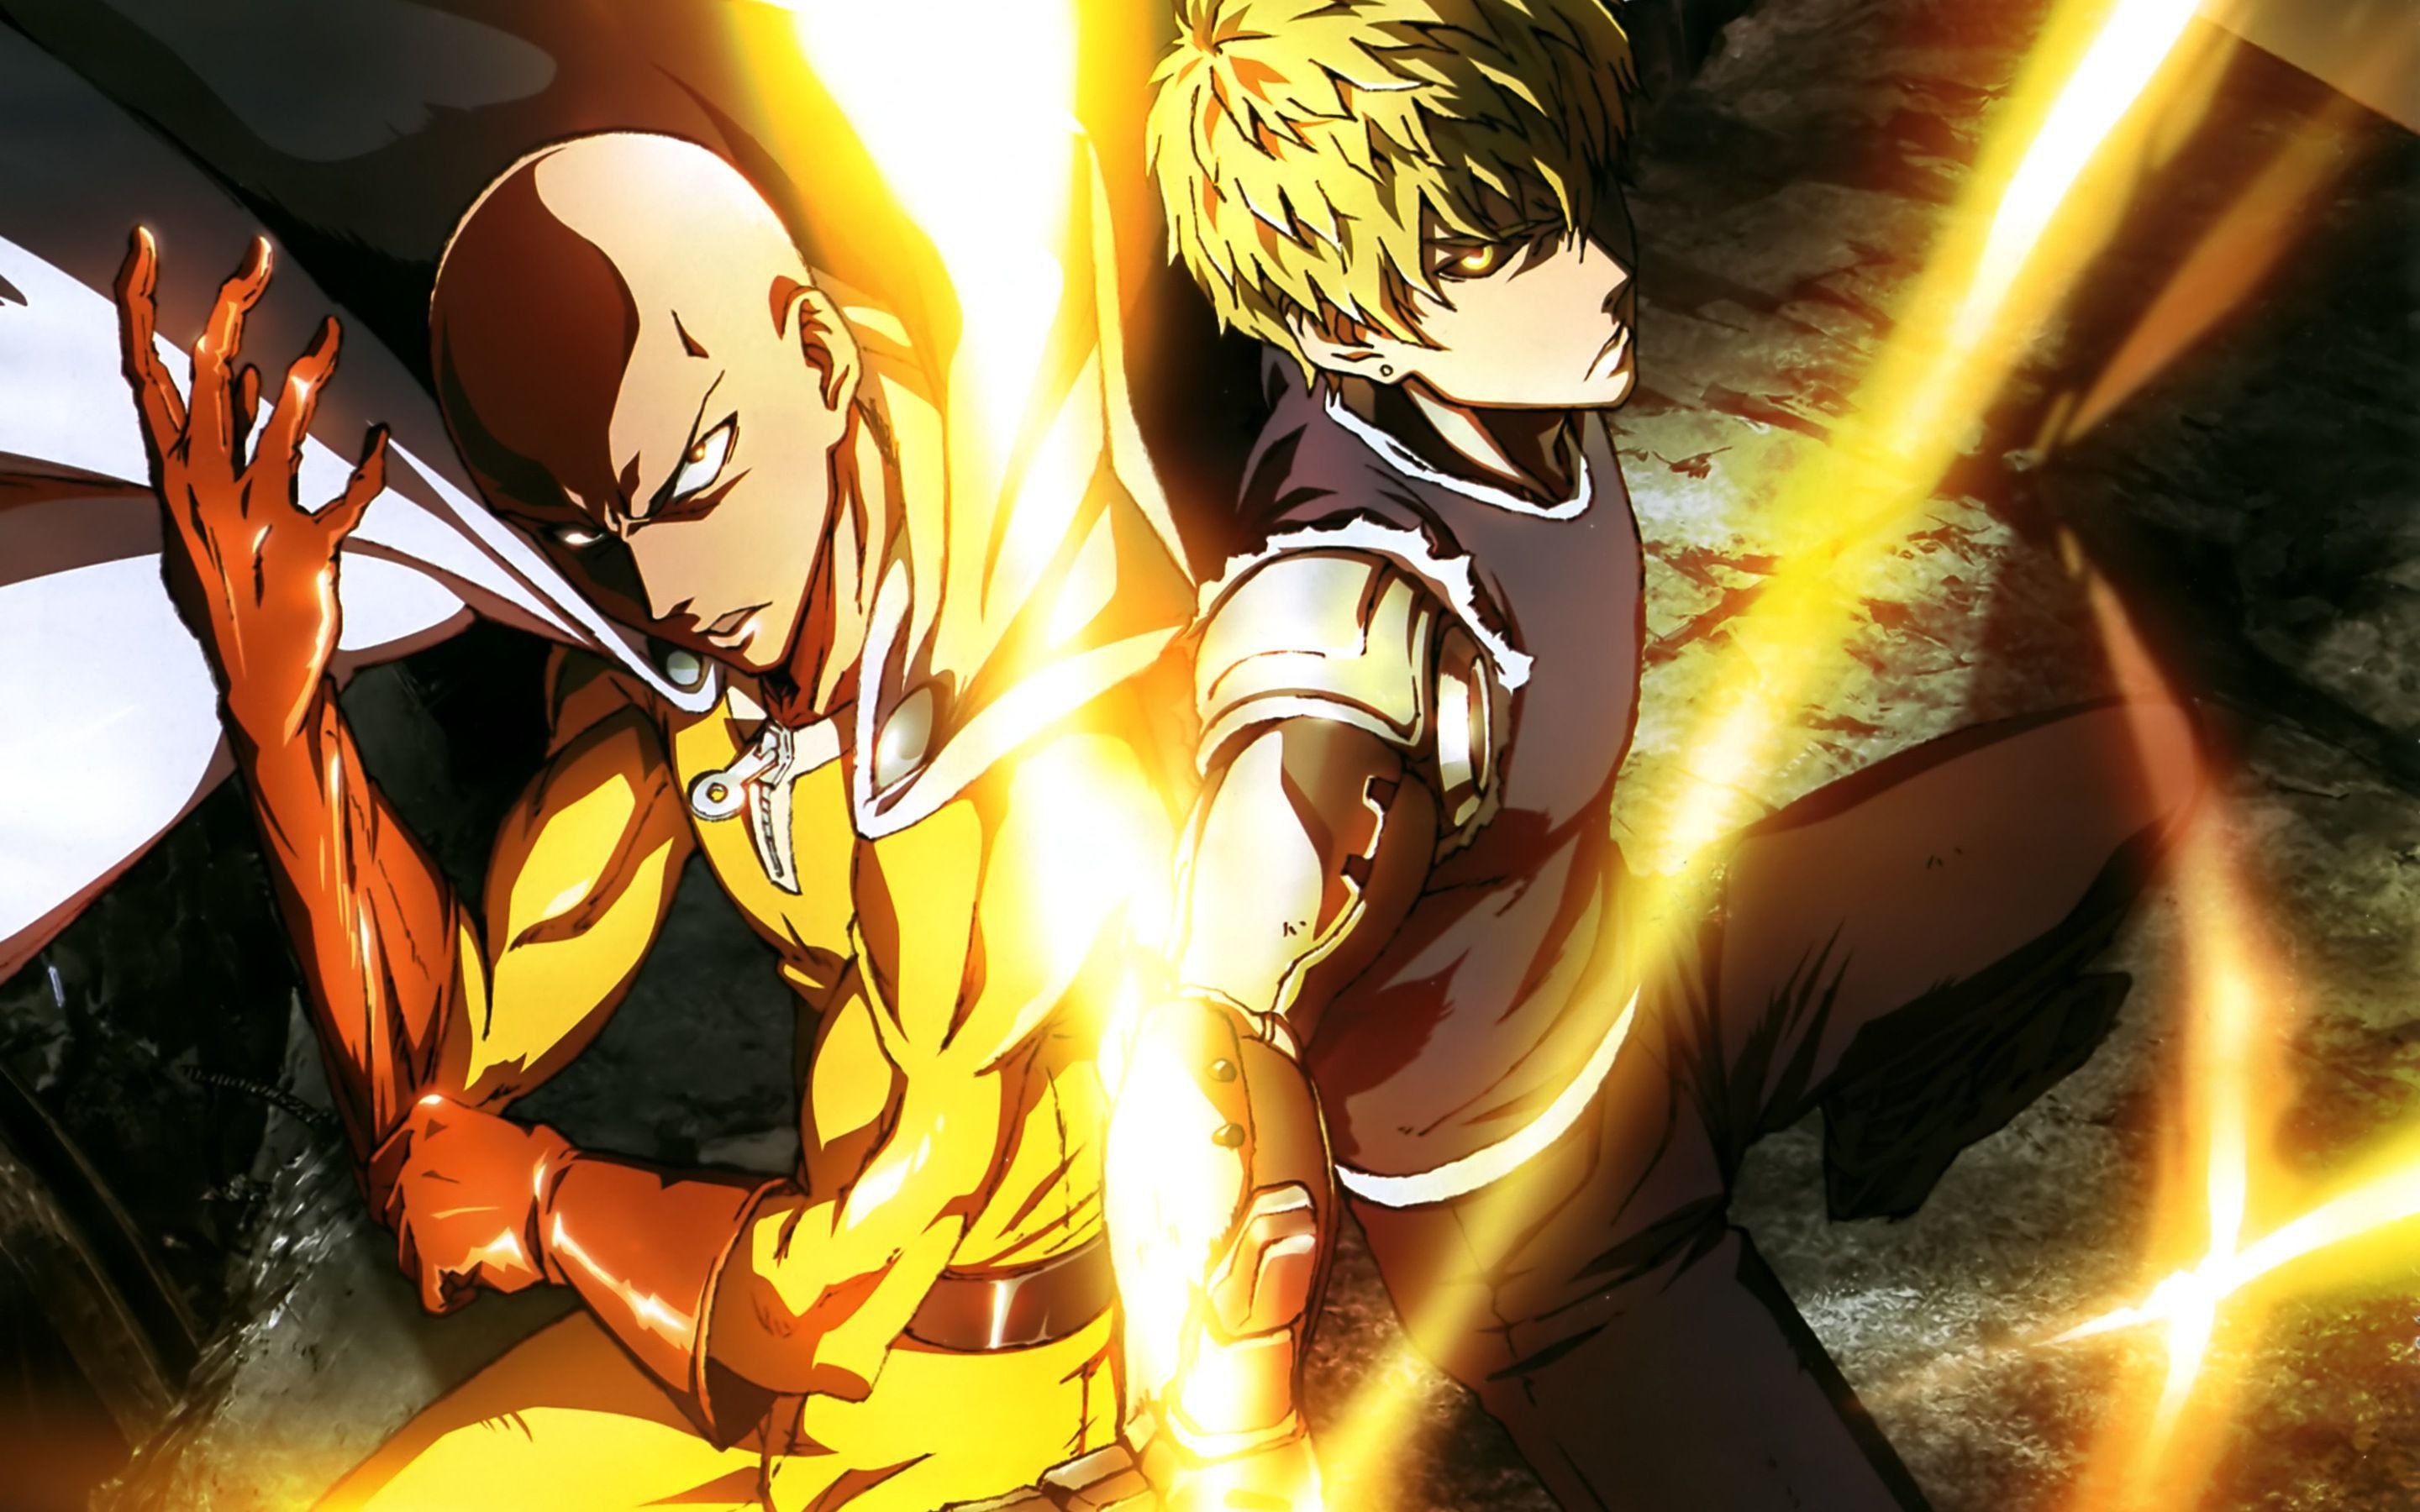 Download Saitama One Punch Man Marvelous Anime Halloween Wallpaper In Many  Resolutions